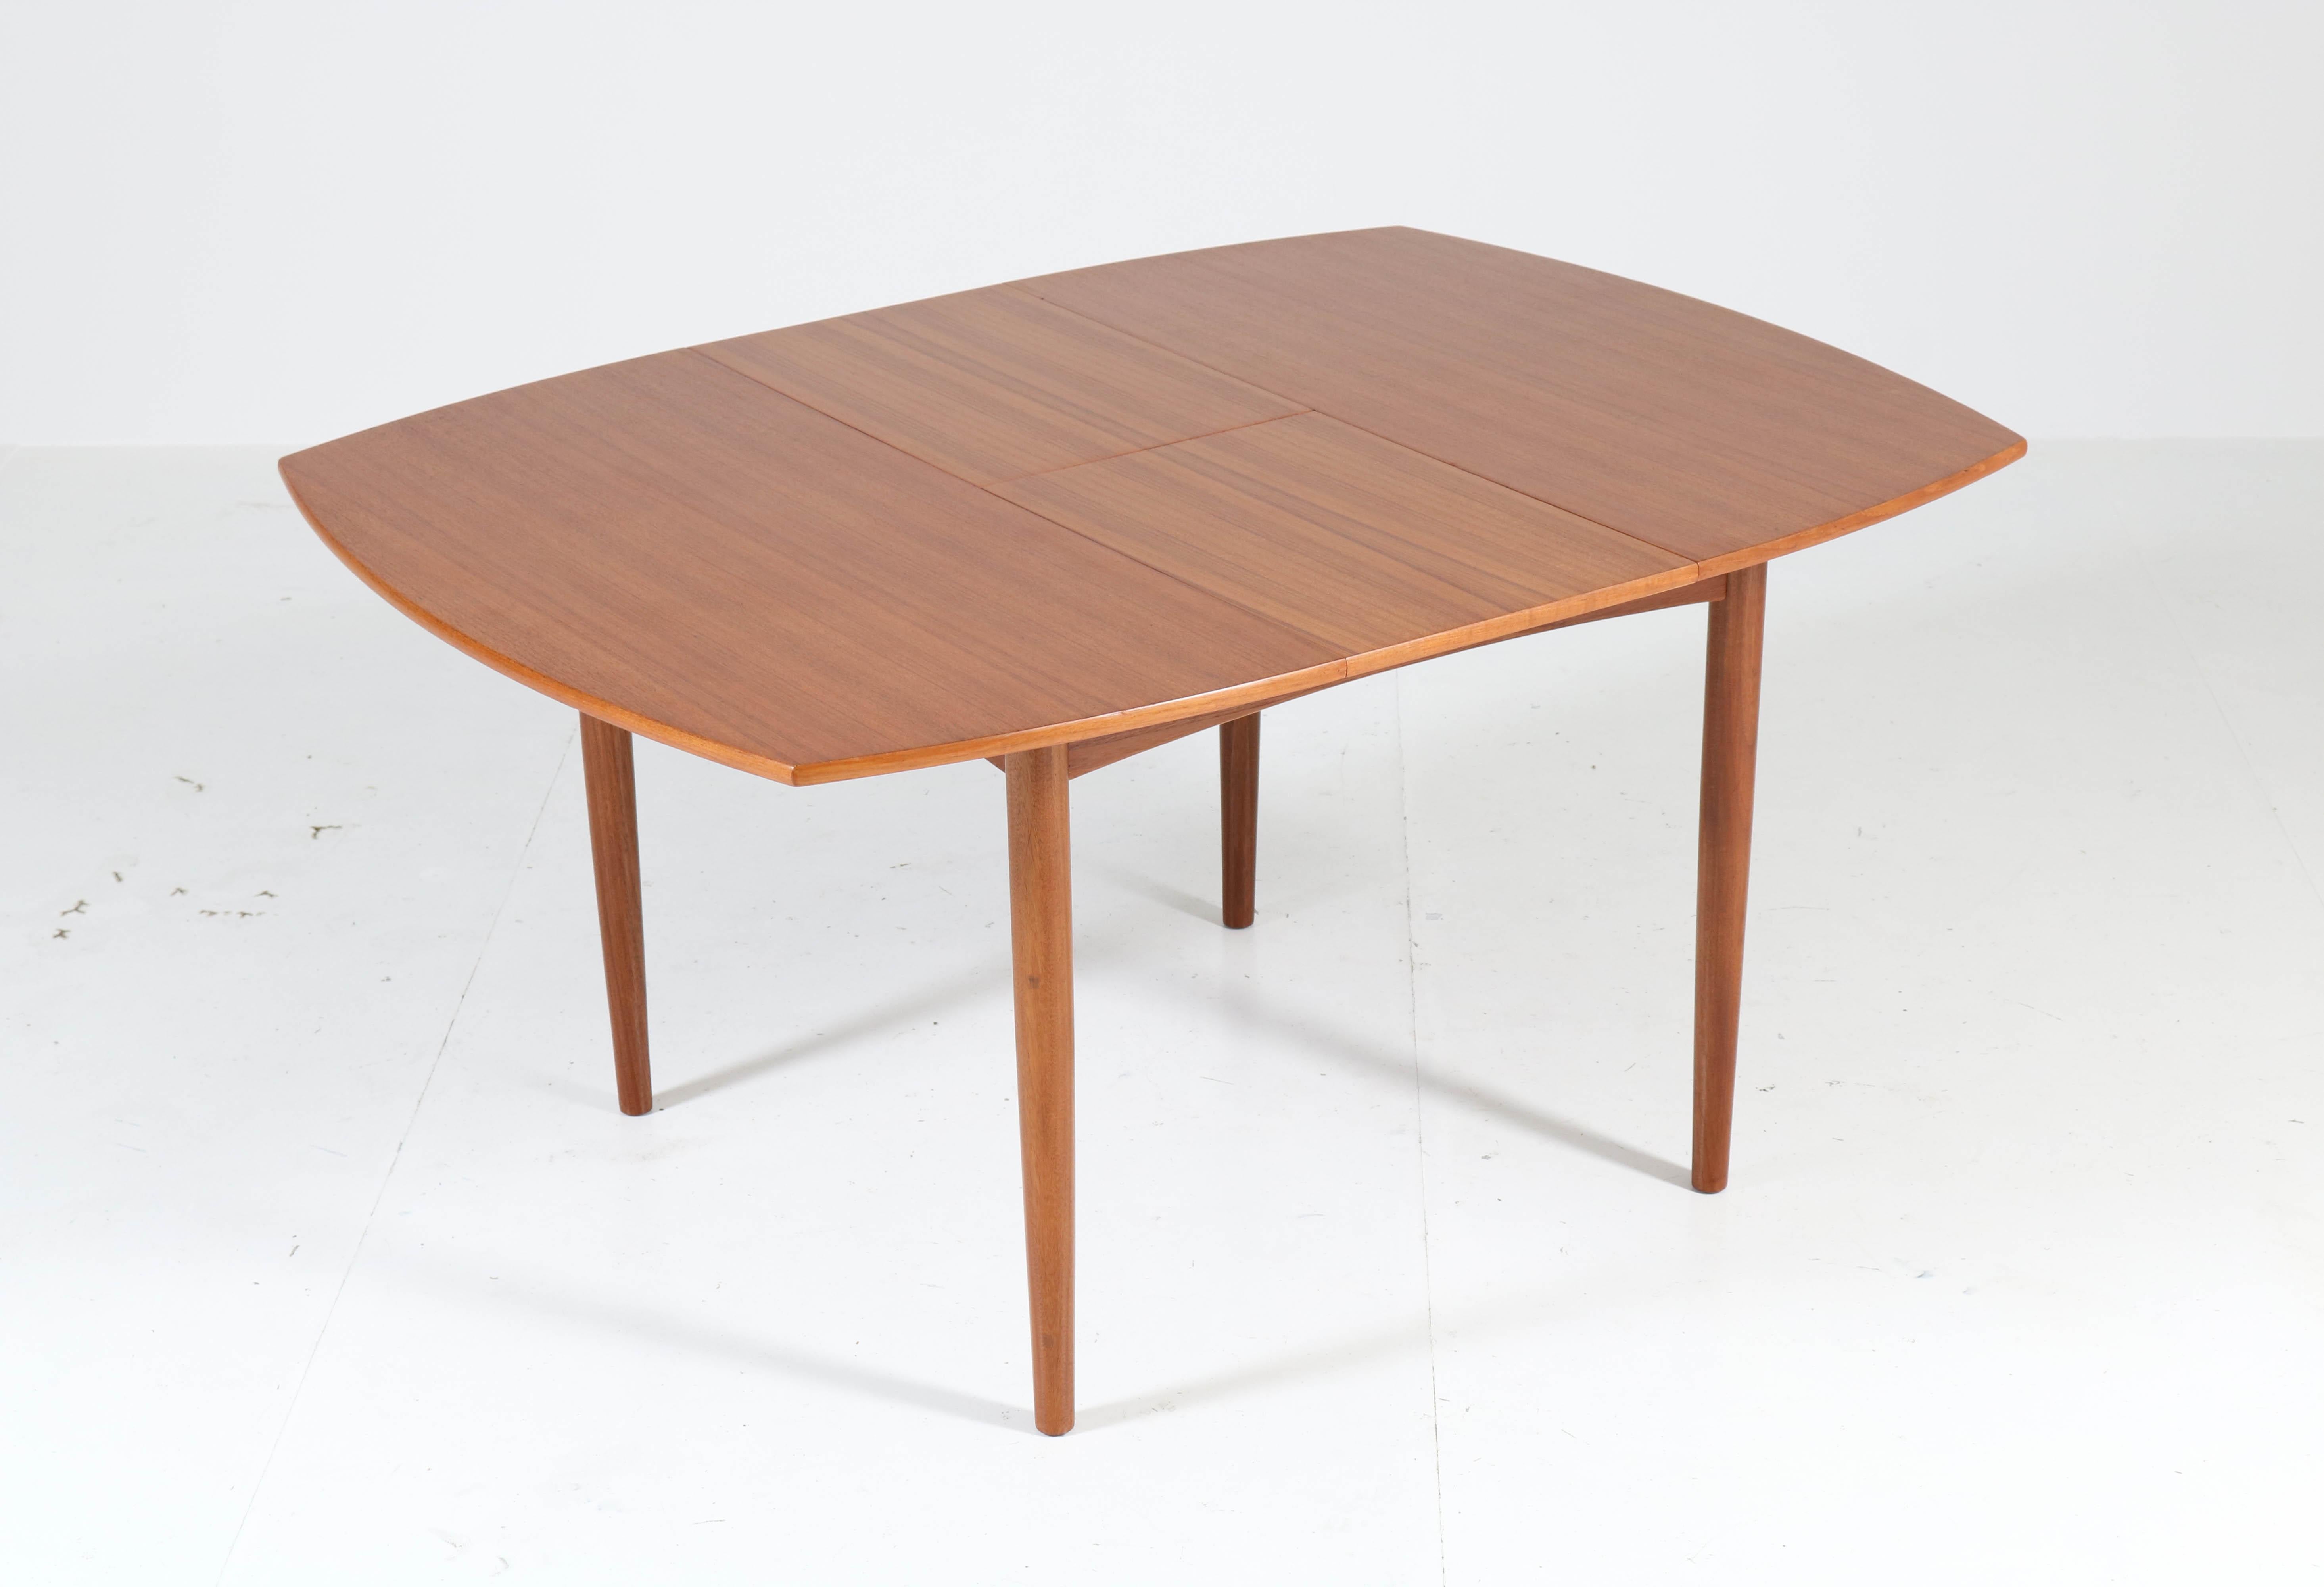 Wonderful and rare Mid-Century Modern extendable dining room table.
Design by Cees Braakman for UMS Pastoe.
Striking Dutch design from the 1960s.
In extended version 147.5 cm or 57.53 in.
In very good refinished condition with minor wear